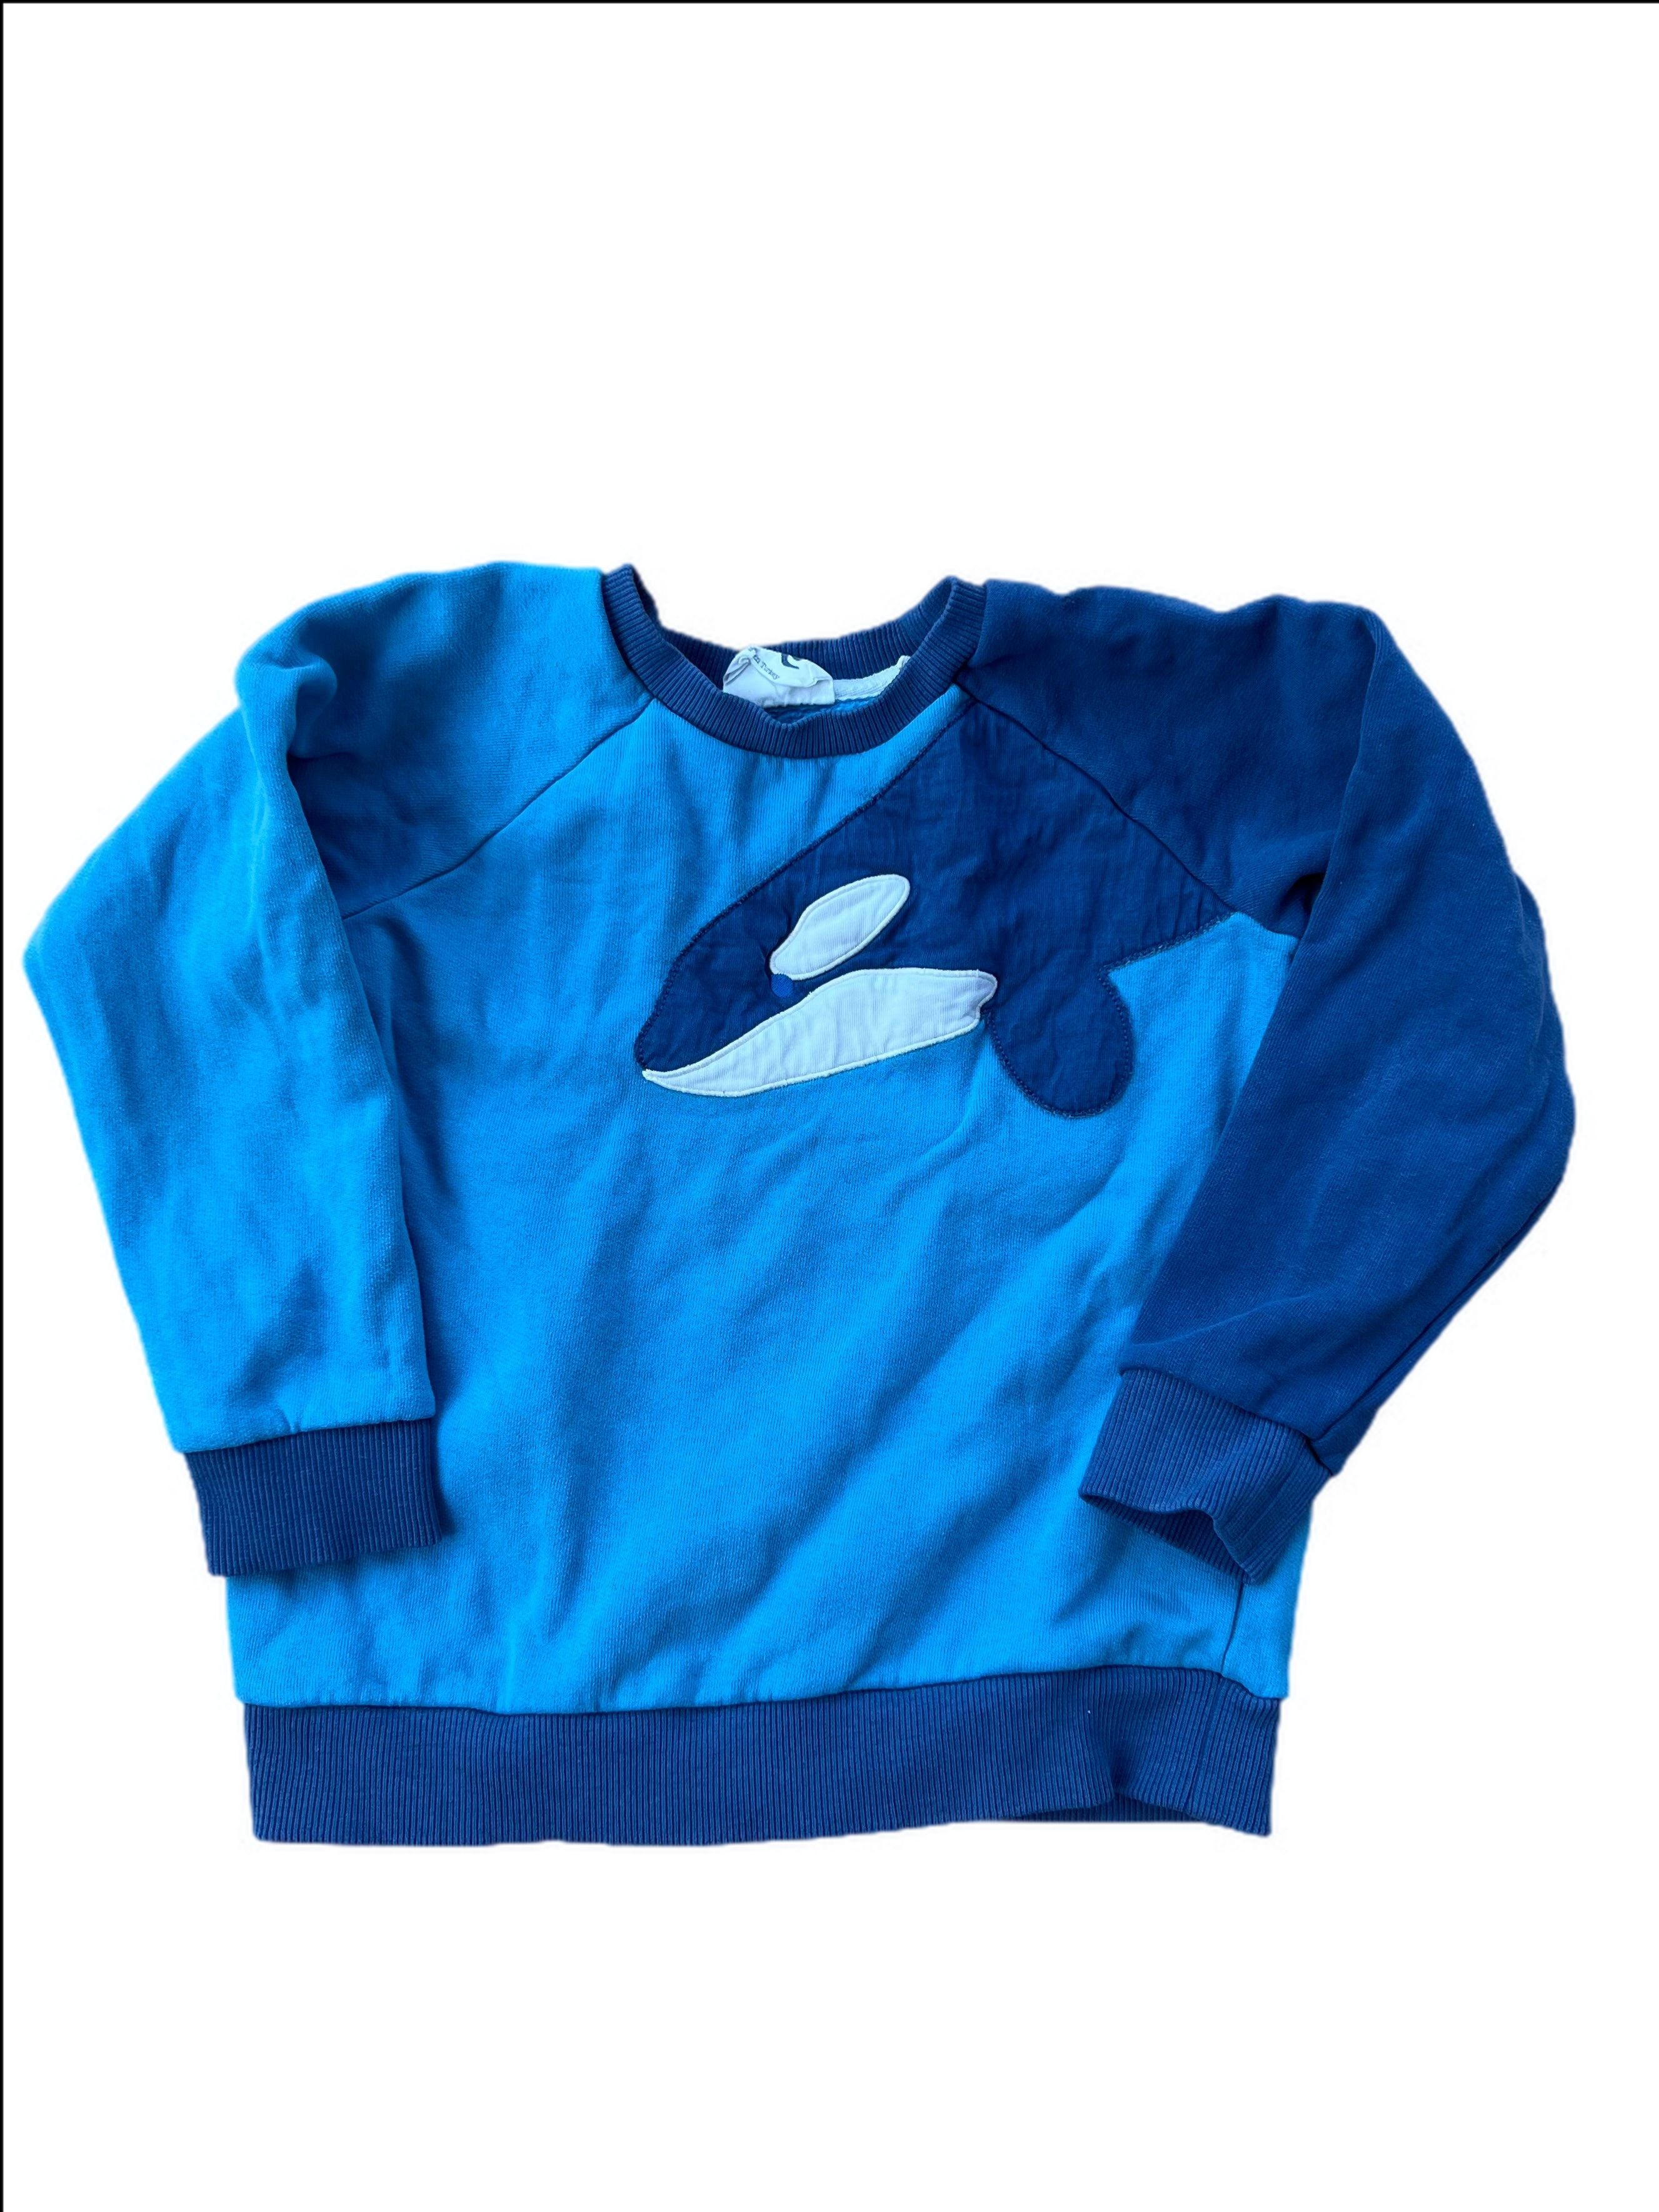 Sweatshirt with Whale Applique